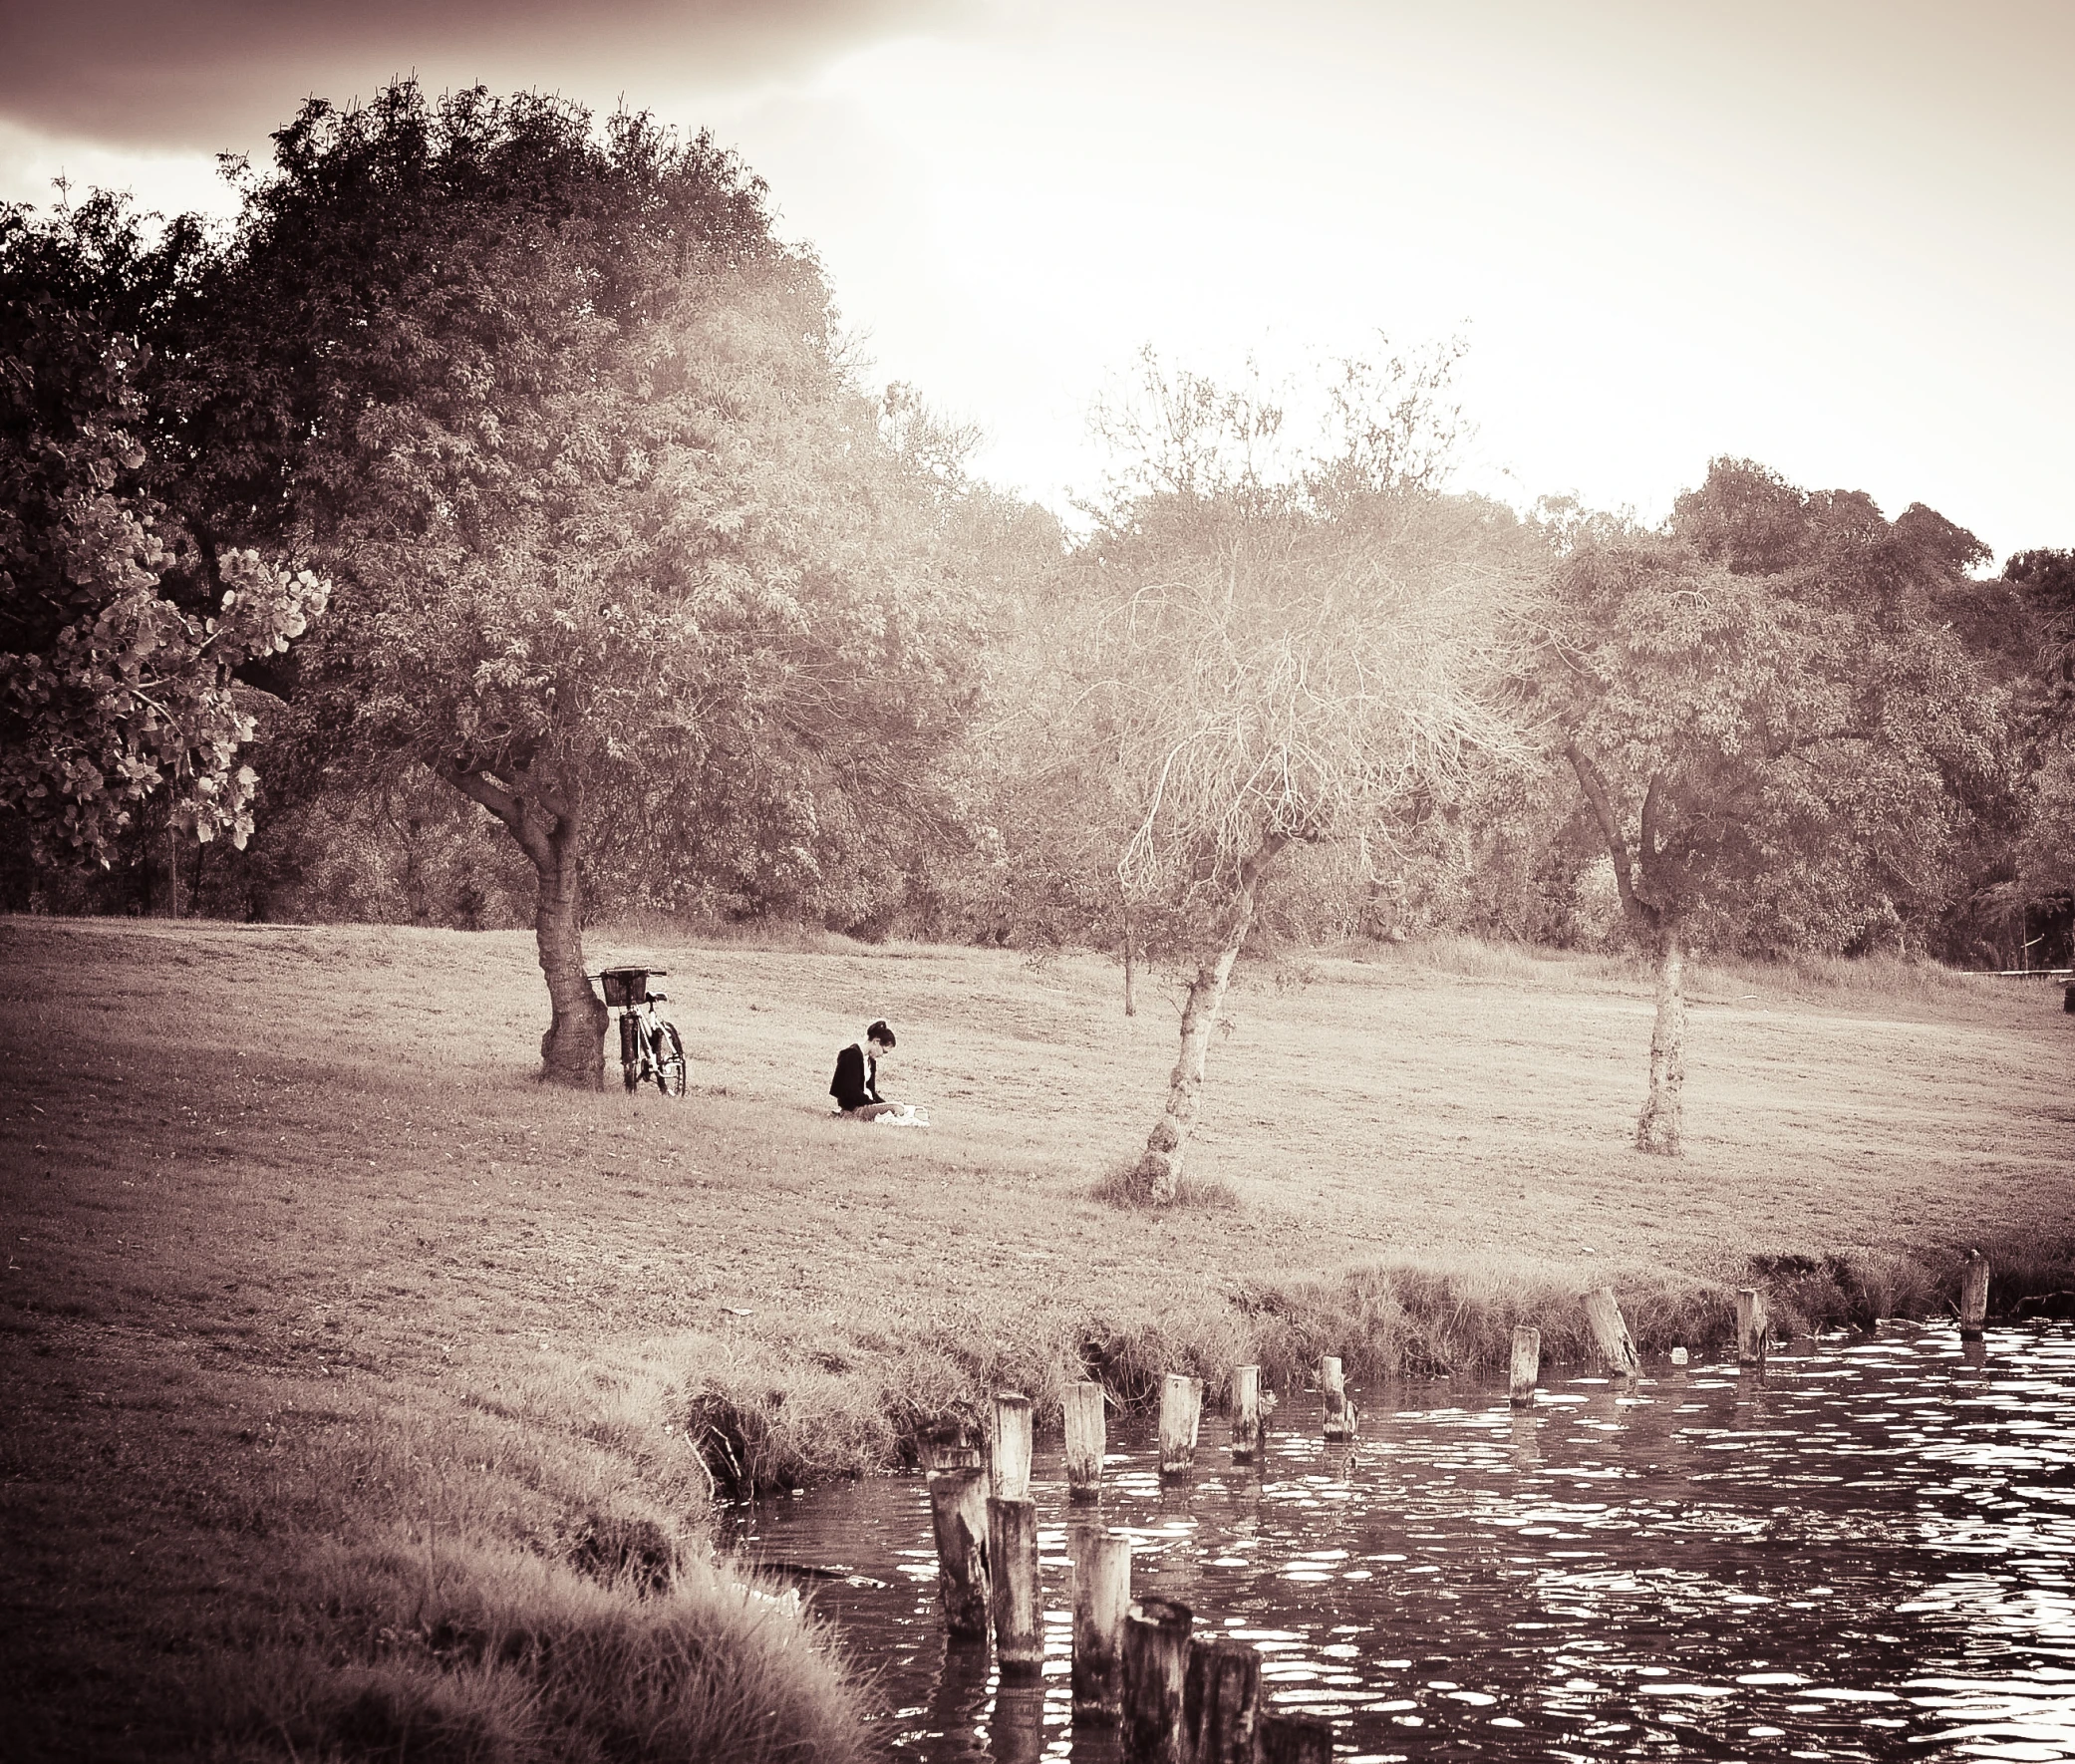 three people sitting on a field near the water